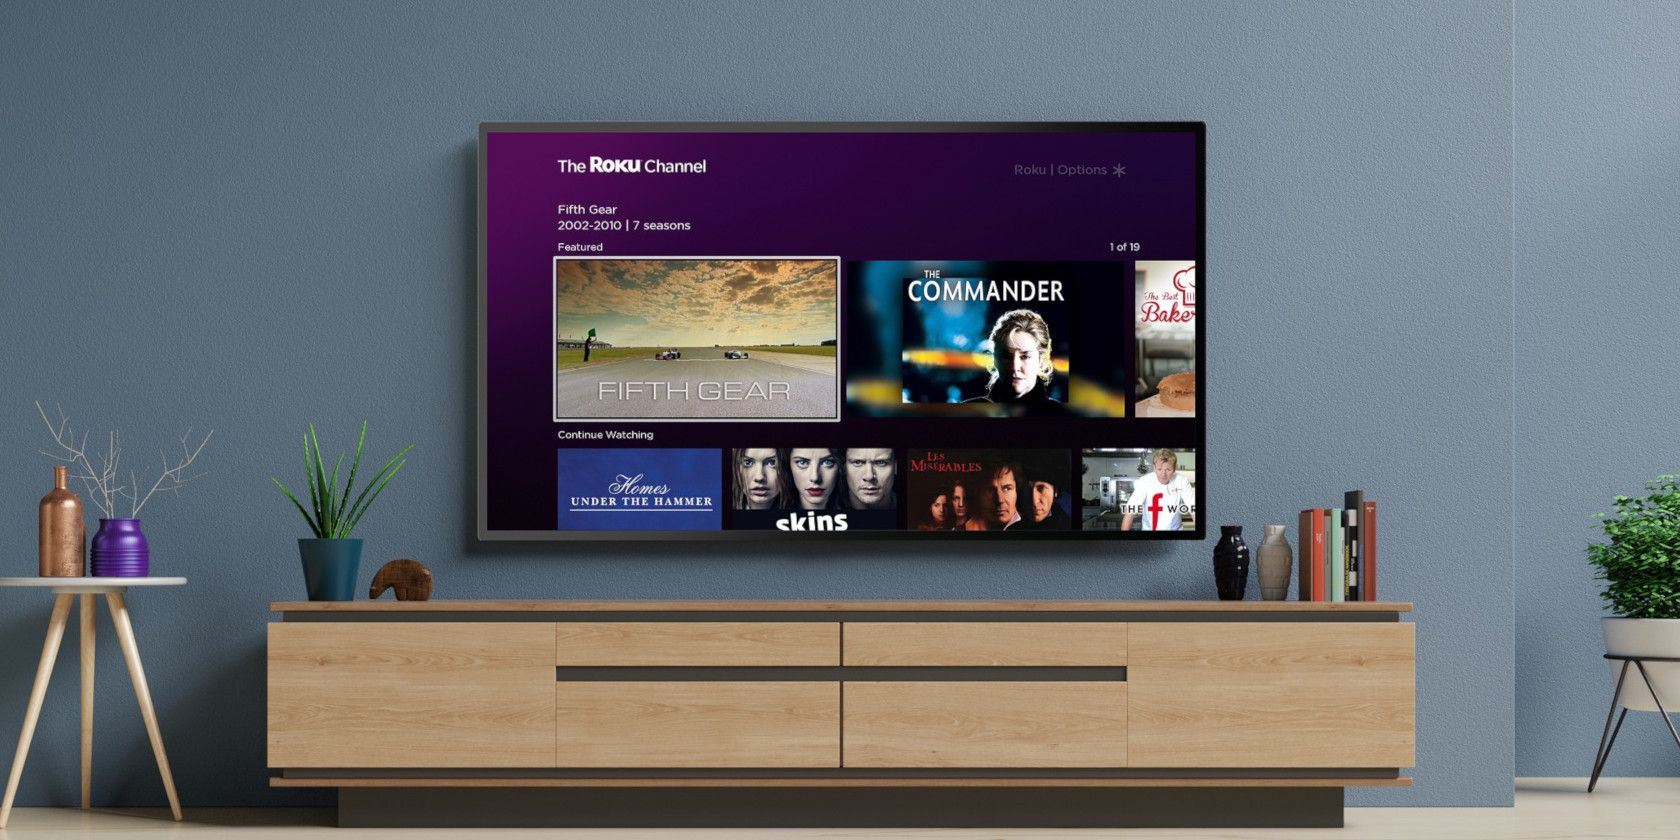 A wall-mounted television with Roku running